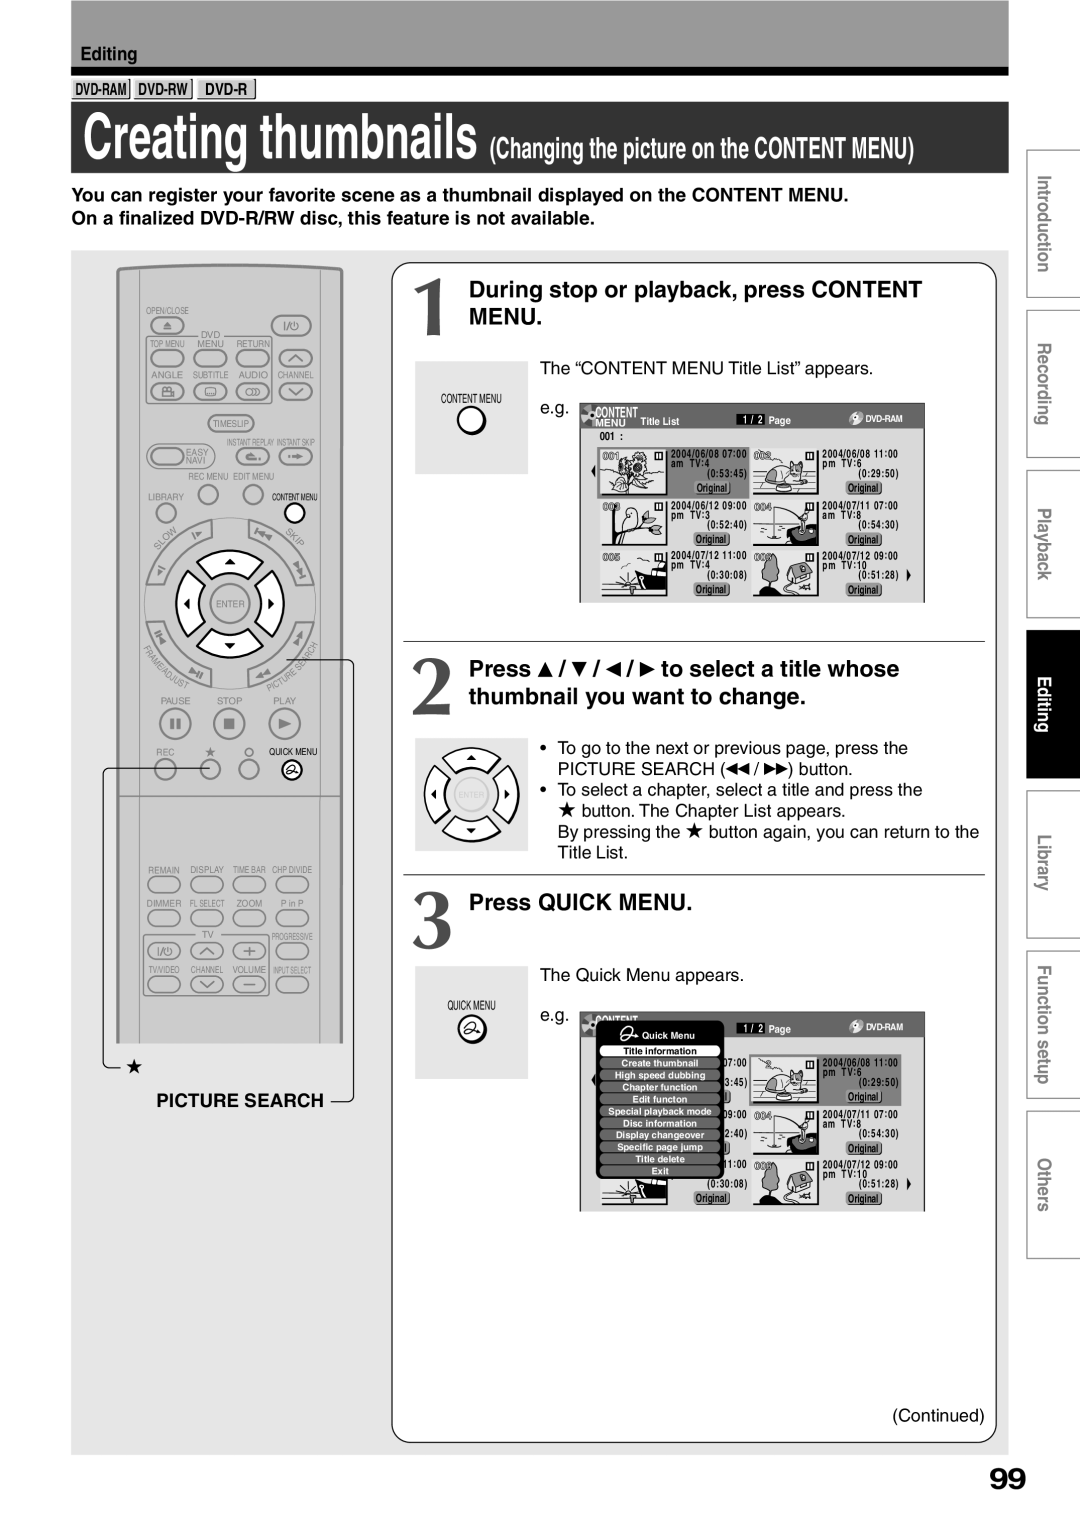 Toshiba D-R2SU During stop or playback, press CONTENT MENU, Press QUICK MENU, Editing, Picture Search, Playback, Content 